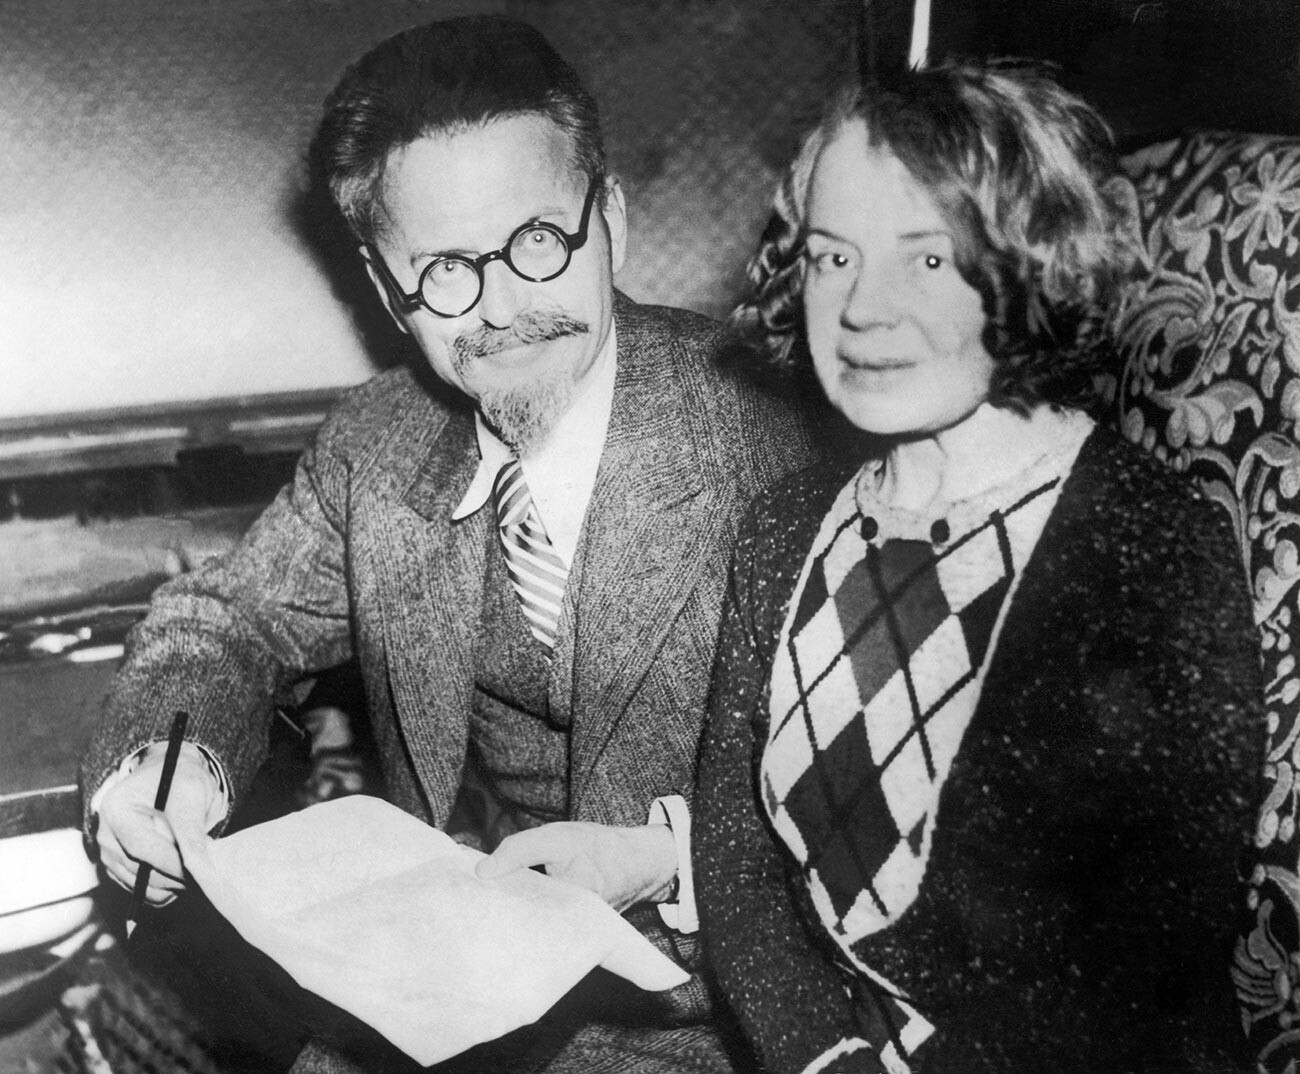  Leon Trotsky in Mexico with his wife Natalia around 1938. 